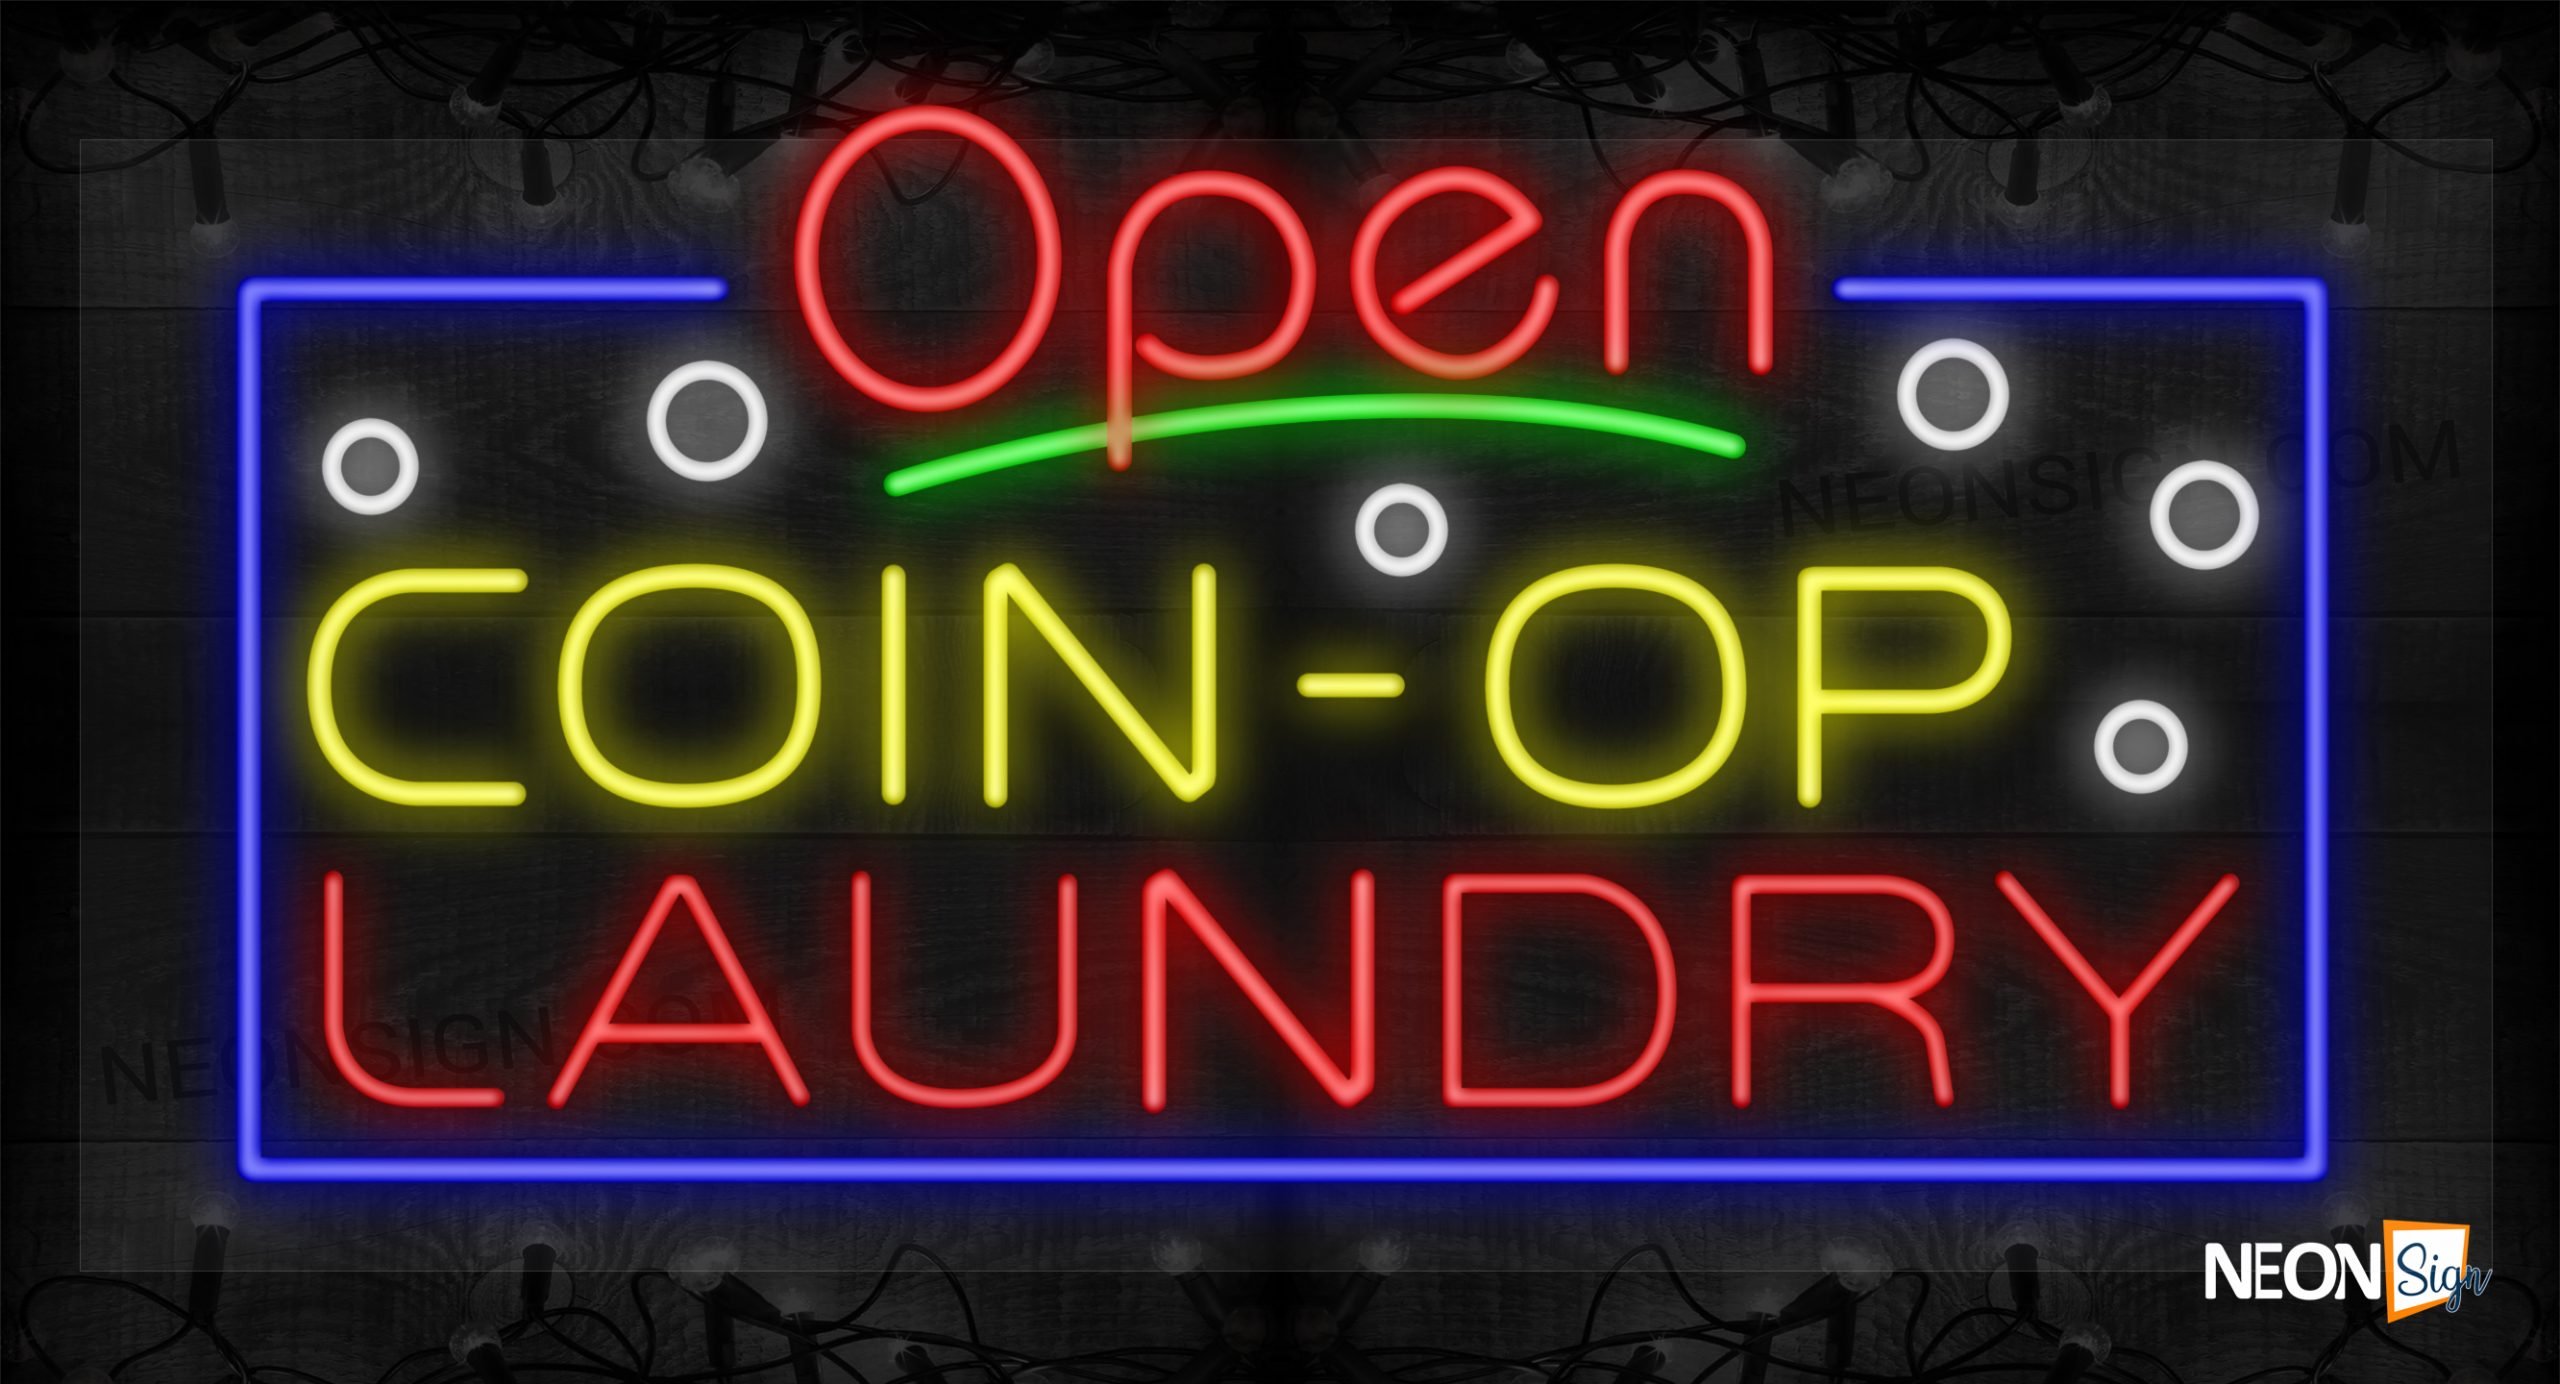 Image of Open Coin-Op Laundry with Bubbles and Blue Border LED Flex